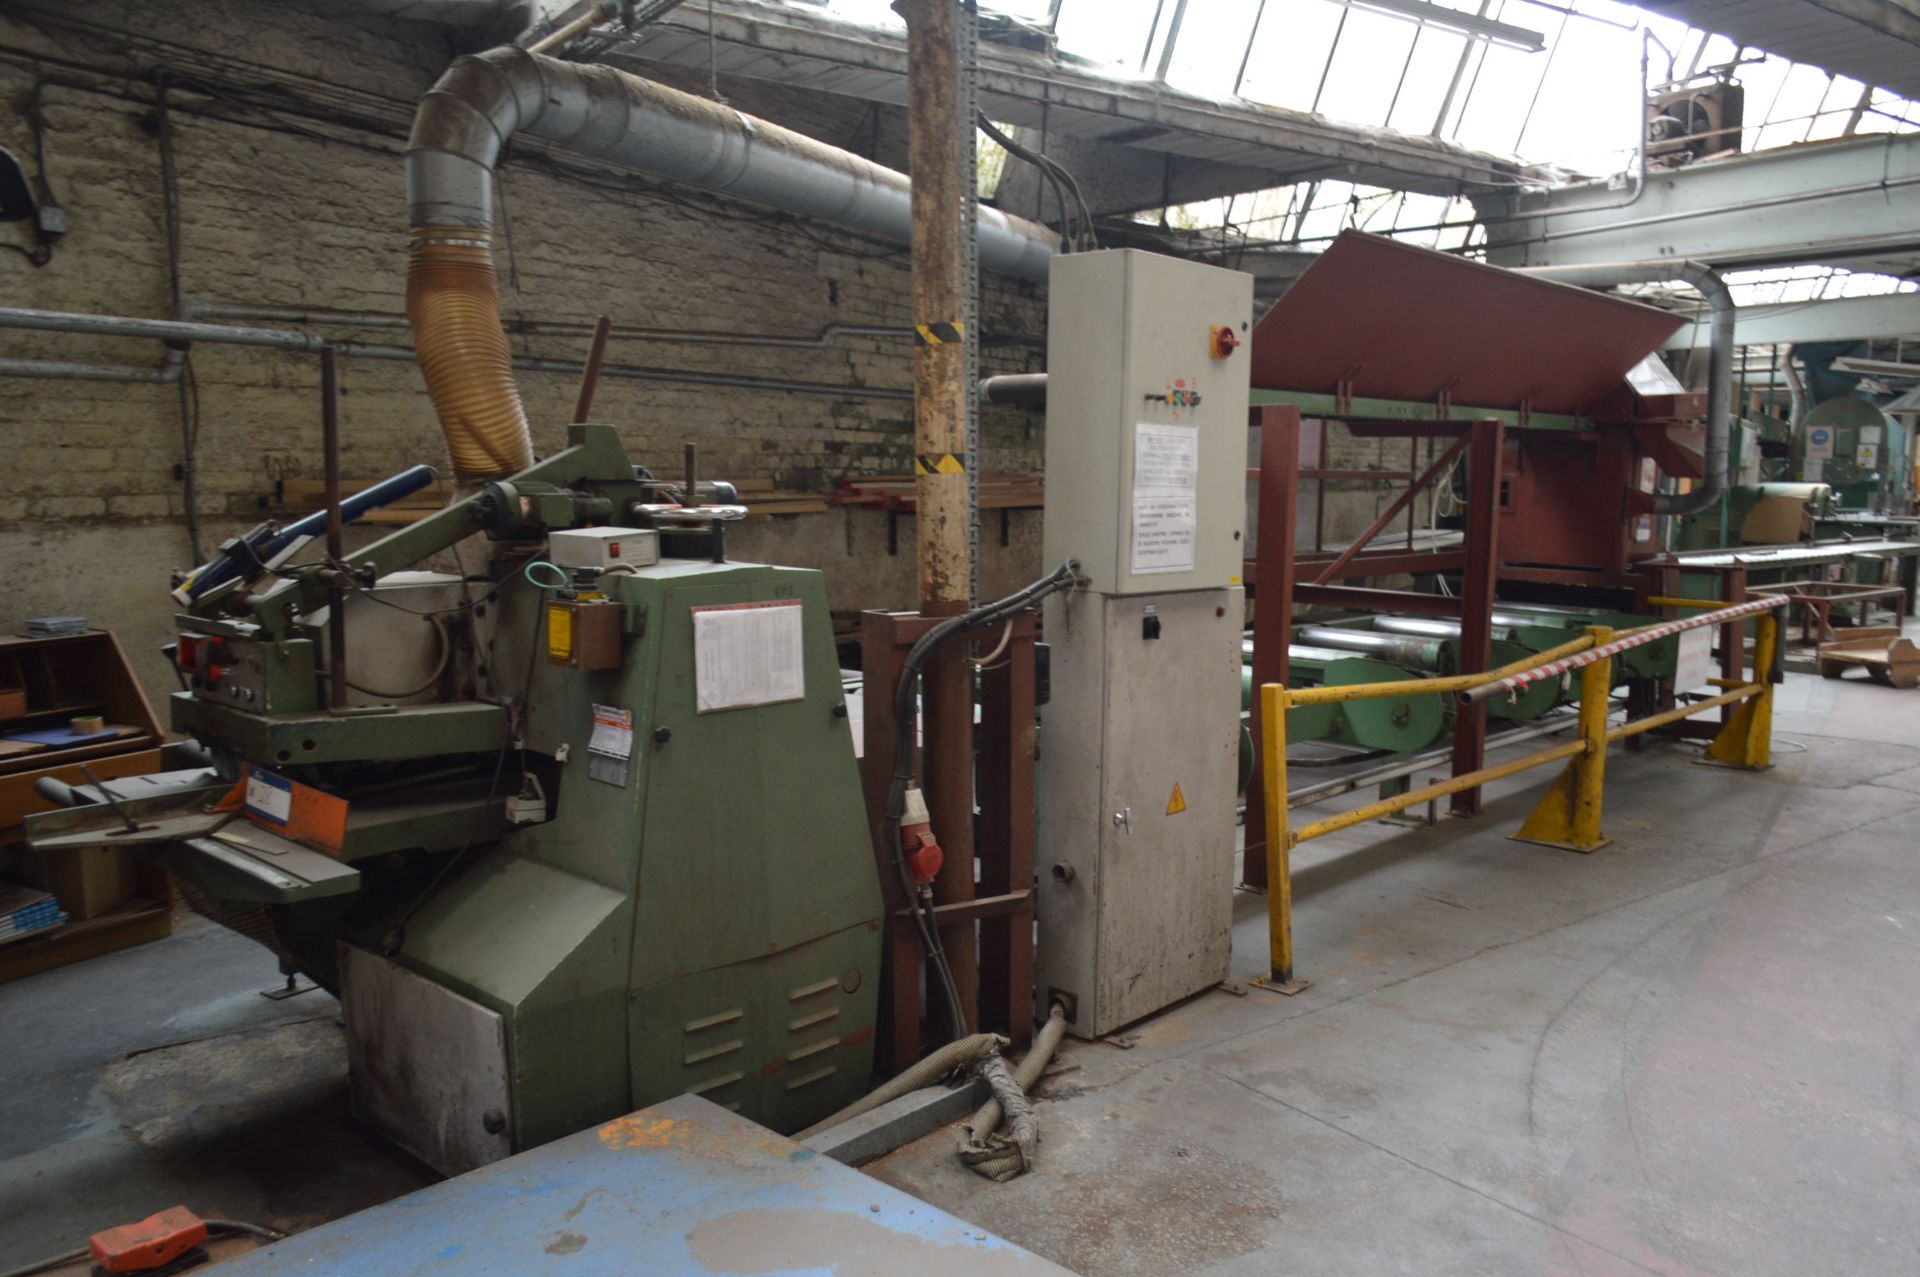 Pinheiro AMA-300A MULTI RIP SAW, serial no. 471, with Wadkin Bursgreen roller table and side - Image 2 of 11